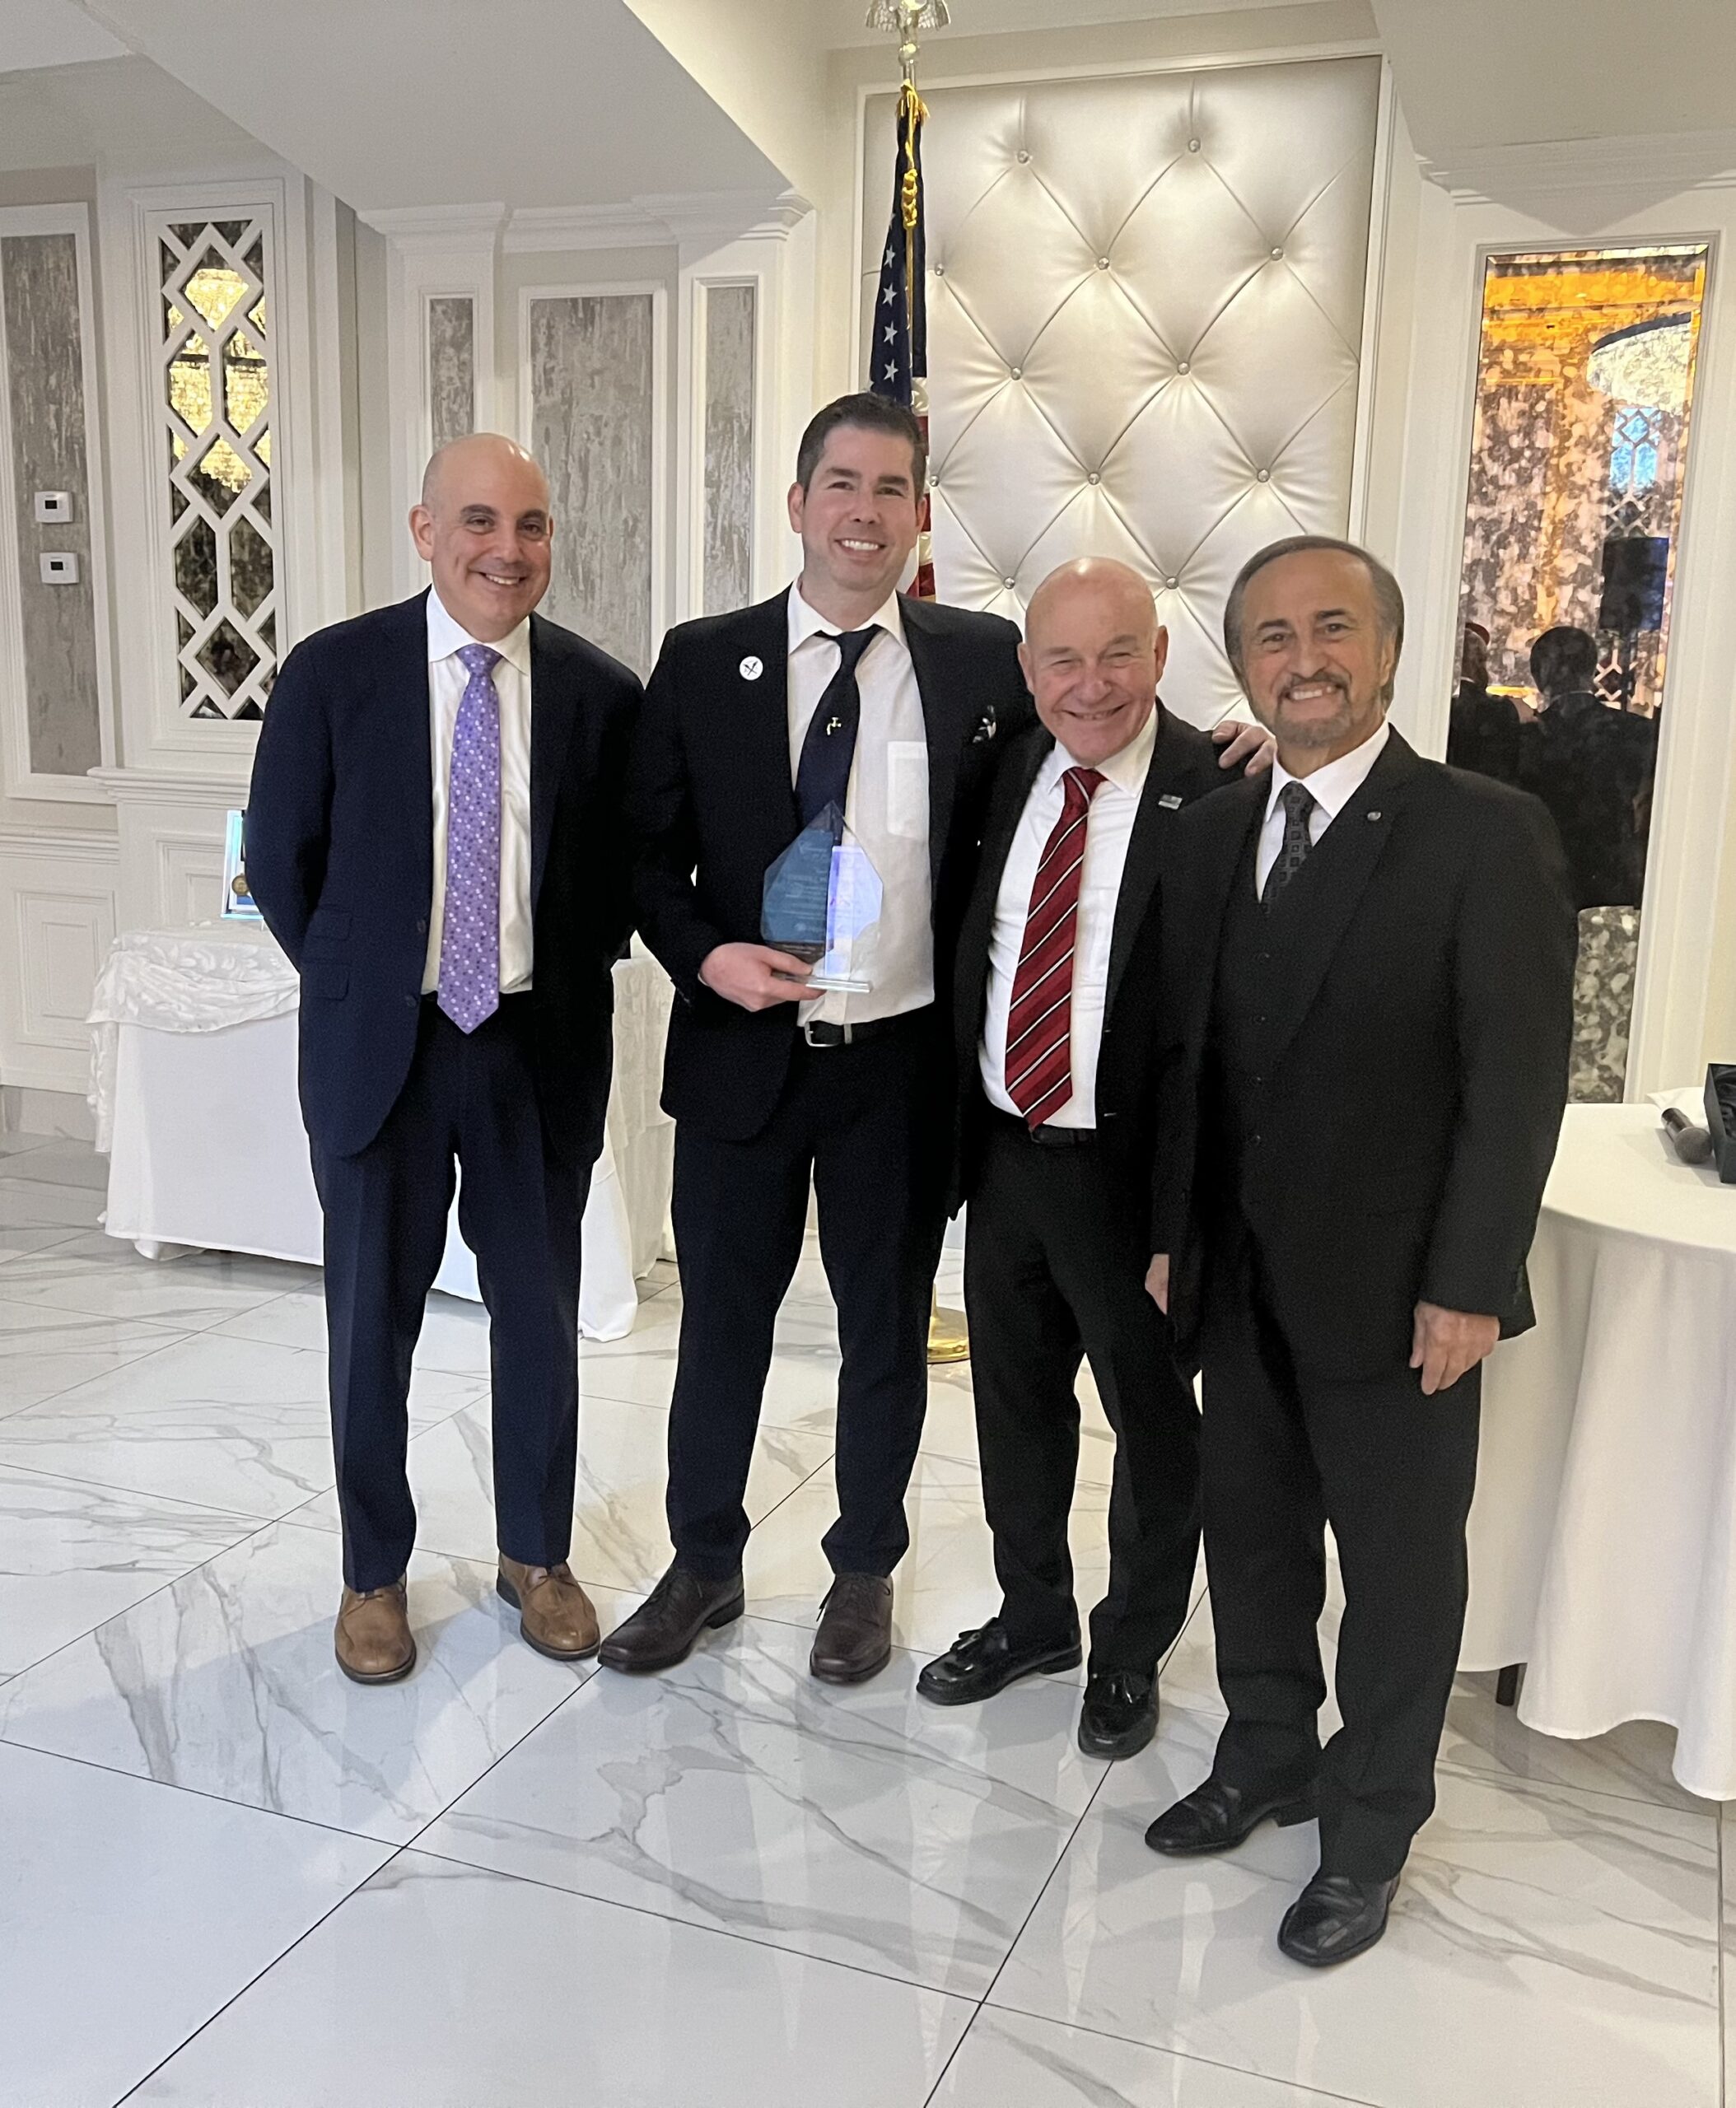 Stephen Ferdinando with his award; and from left: Dr. John Marshall, chair of the Department of Emergency Medicine and vice president for medical affairs at Maimonides; Brian Long; and Frank Naccarato, co-chair of Community for Kids and board member/trustee of Maimonides Medical Center at eighth annual Community for Kids Benefit.